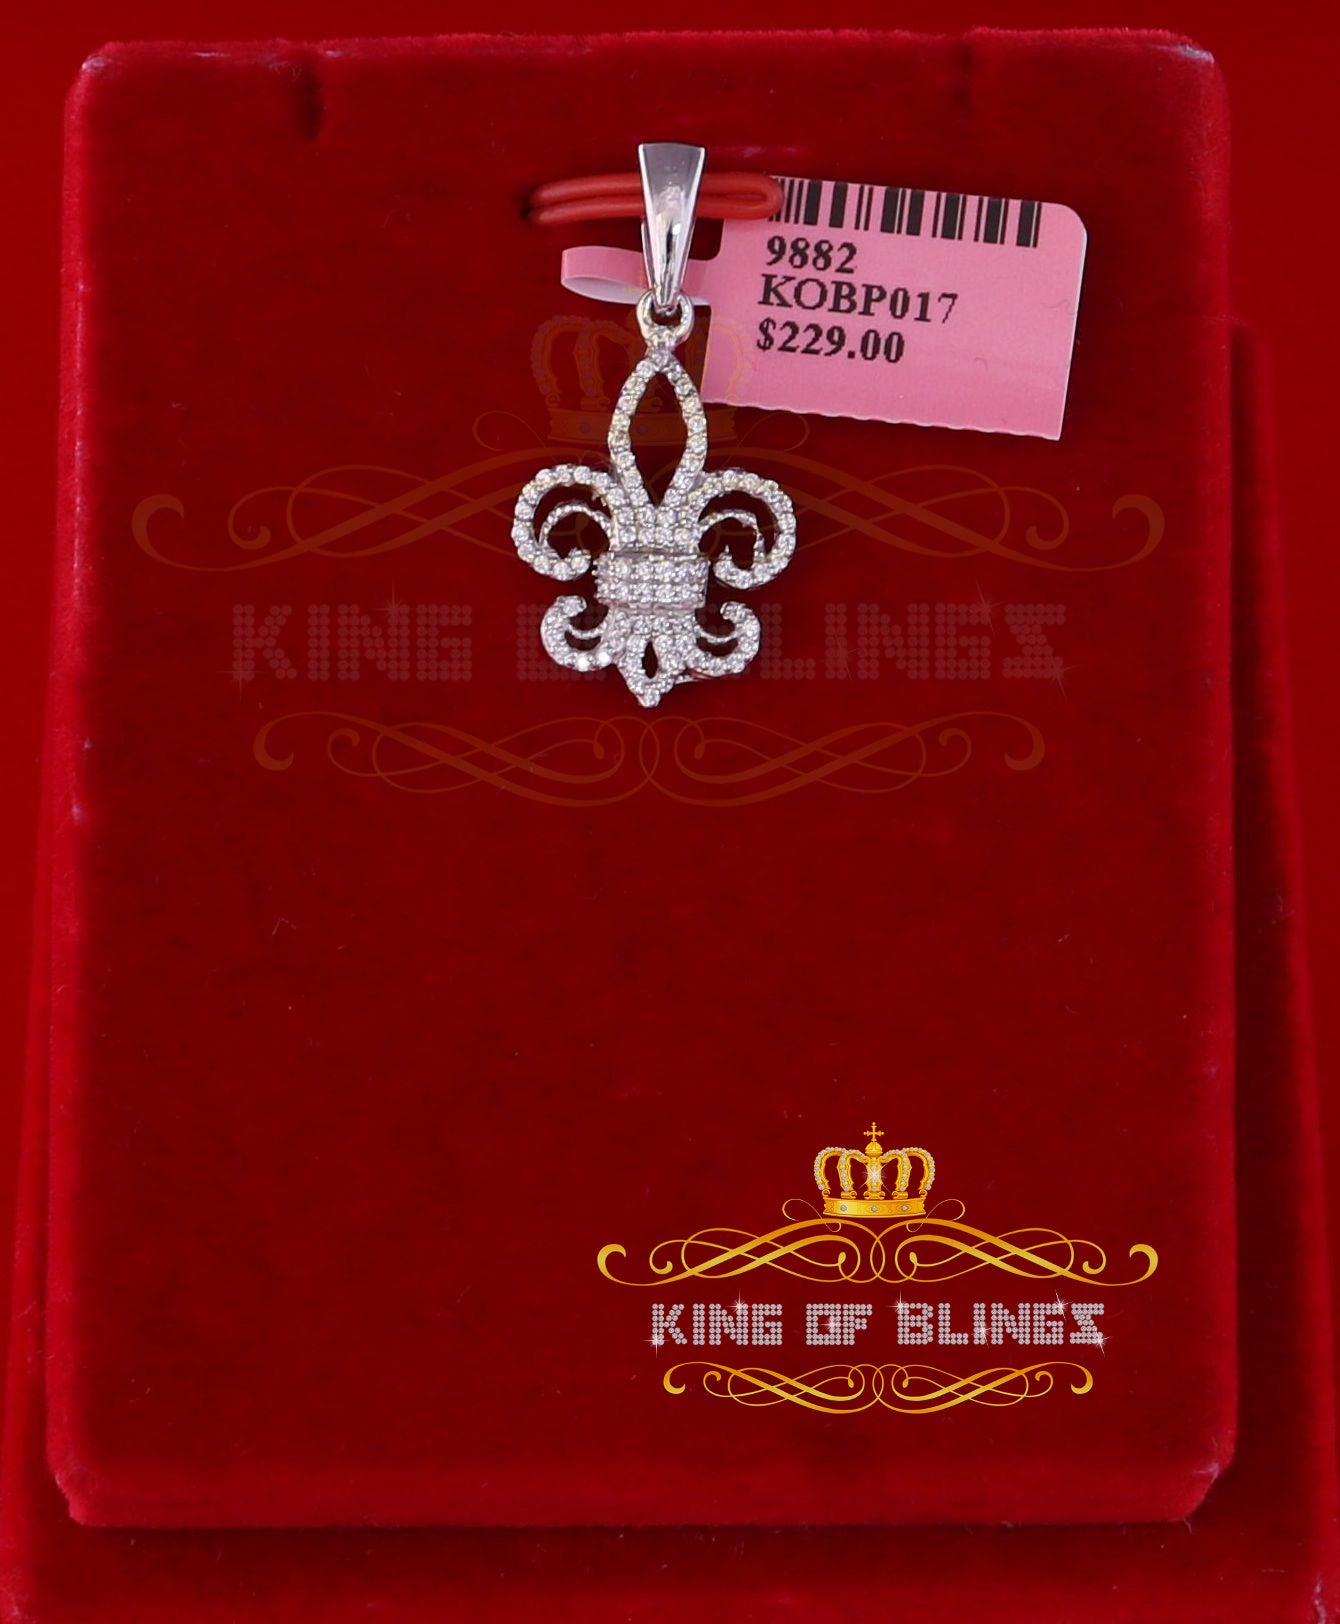 Sterling 925 Silver Fleur de Lis White Shape Pendant with 0.93ct Cubic Zirconia KING OF BLINGS